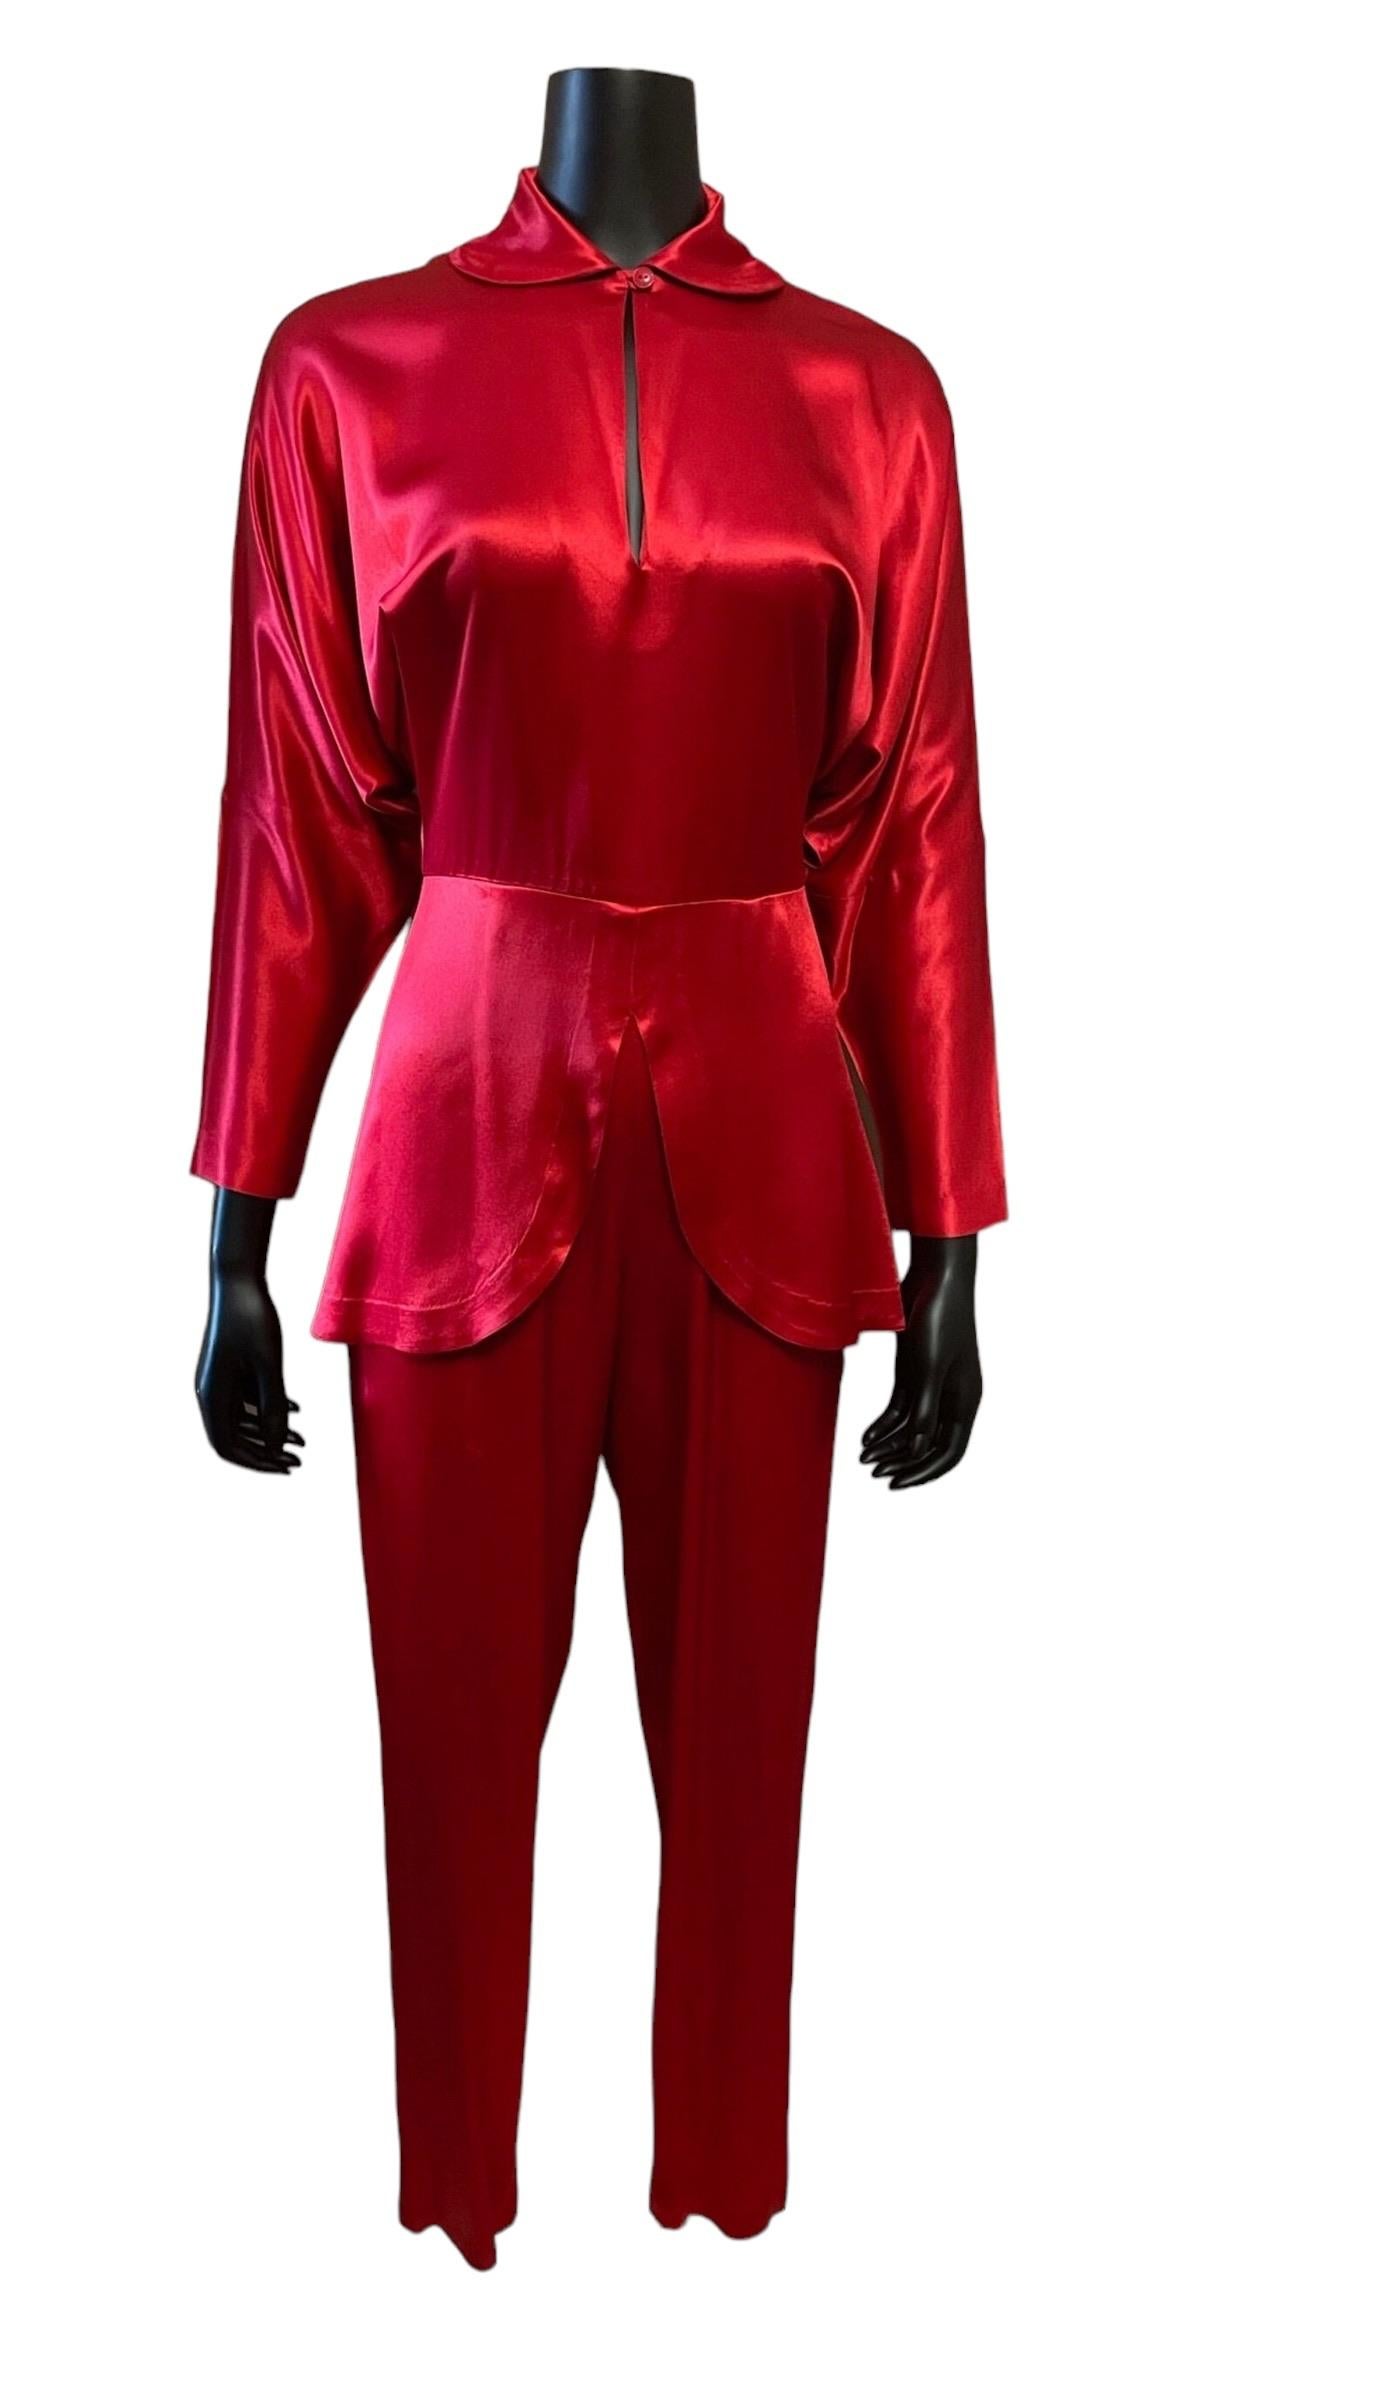 Norma Kamali lipstick red jumpsuit In Excellent Condition For Sale In Brooklyn, NY